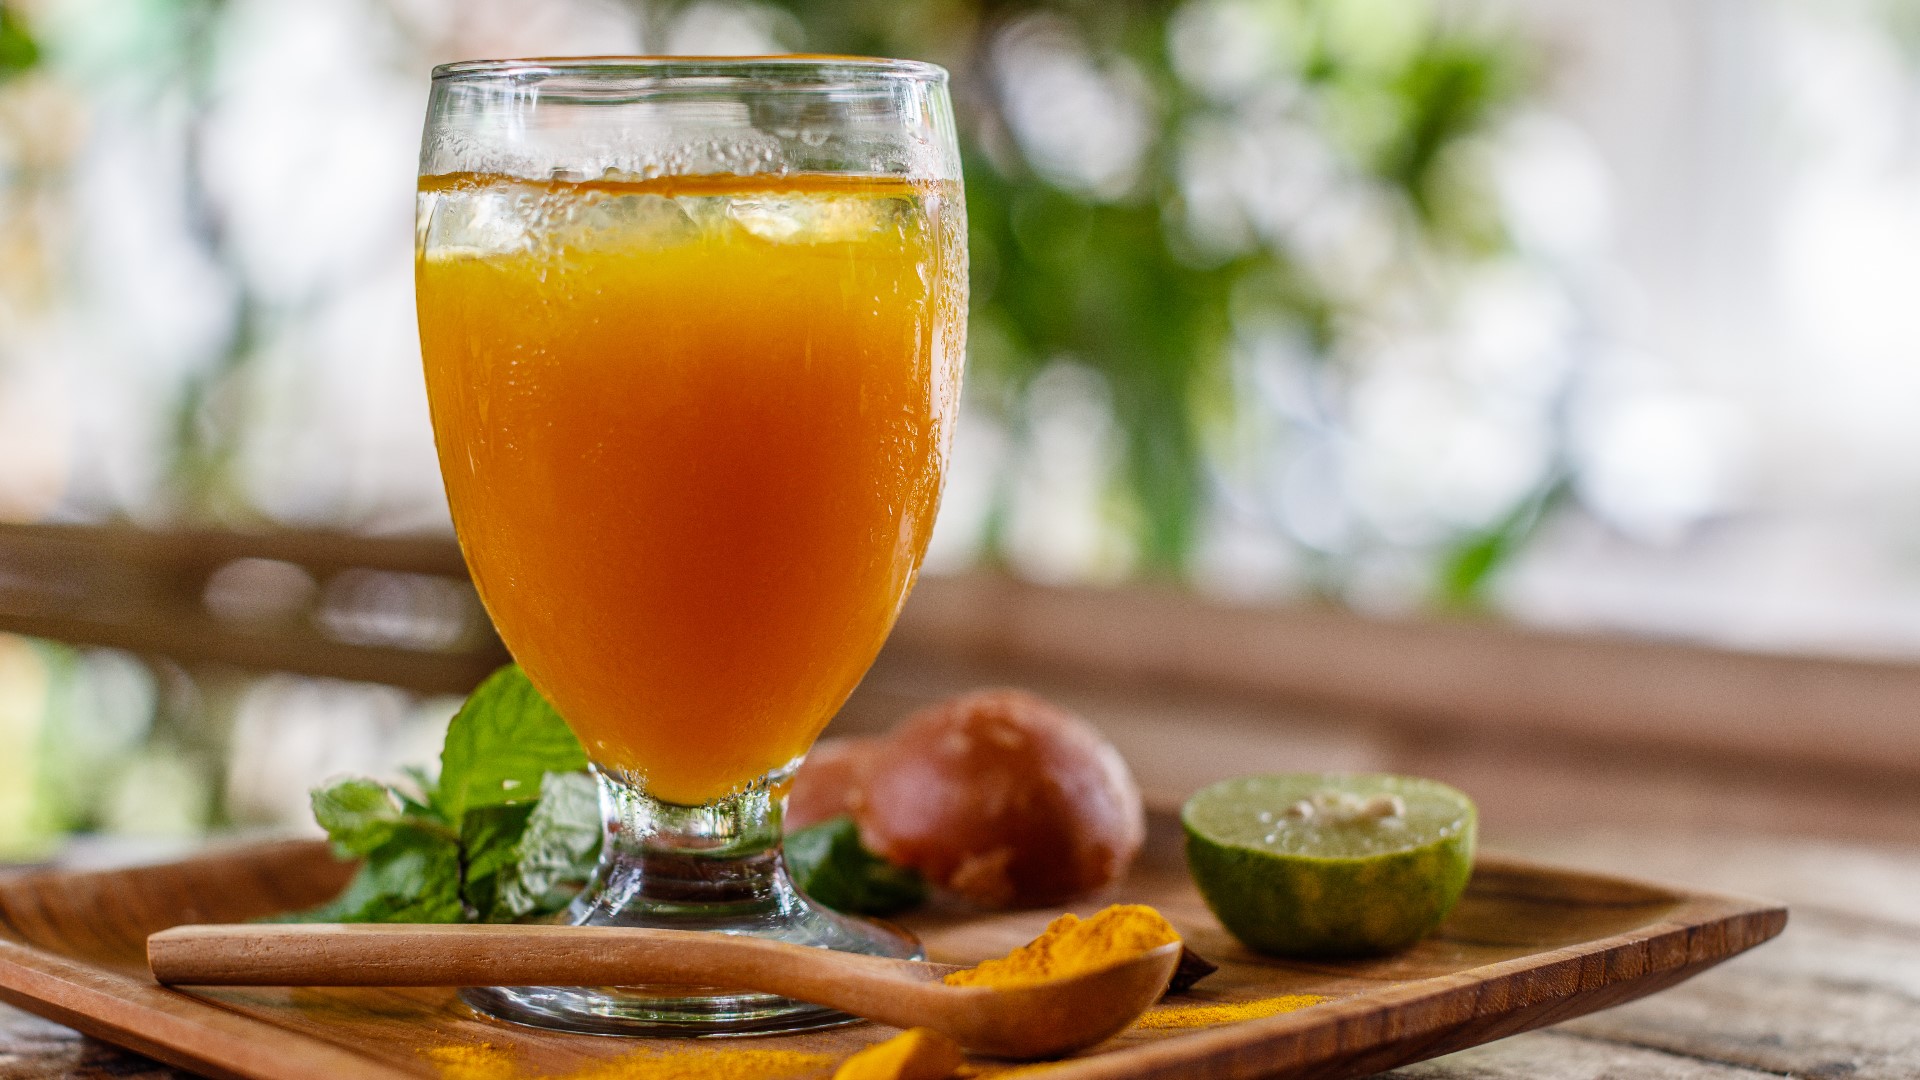 The turmeric and tamarind drink is tangy and refreshing! #newdyanw